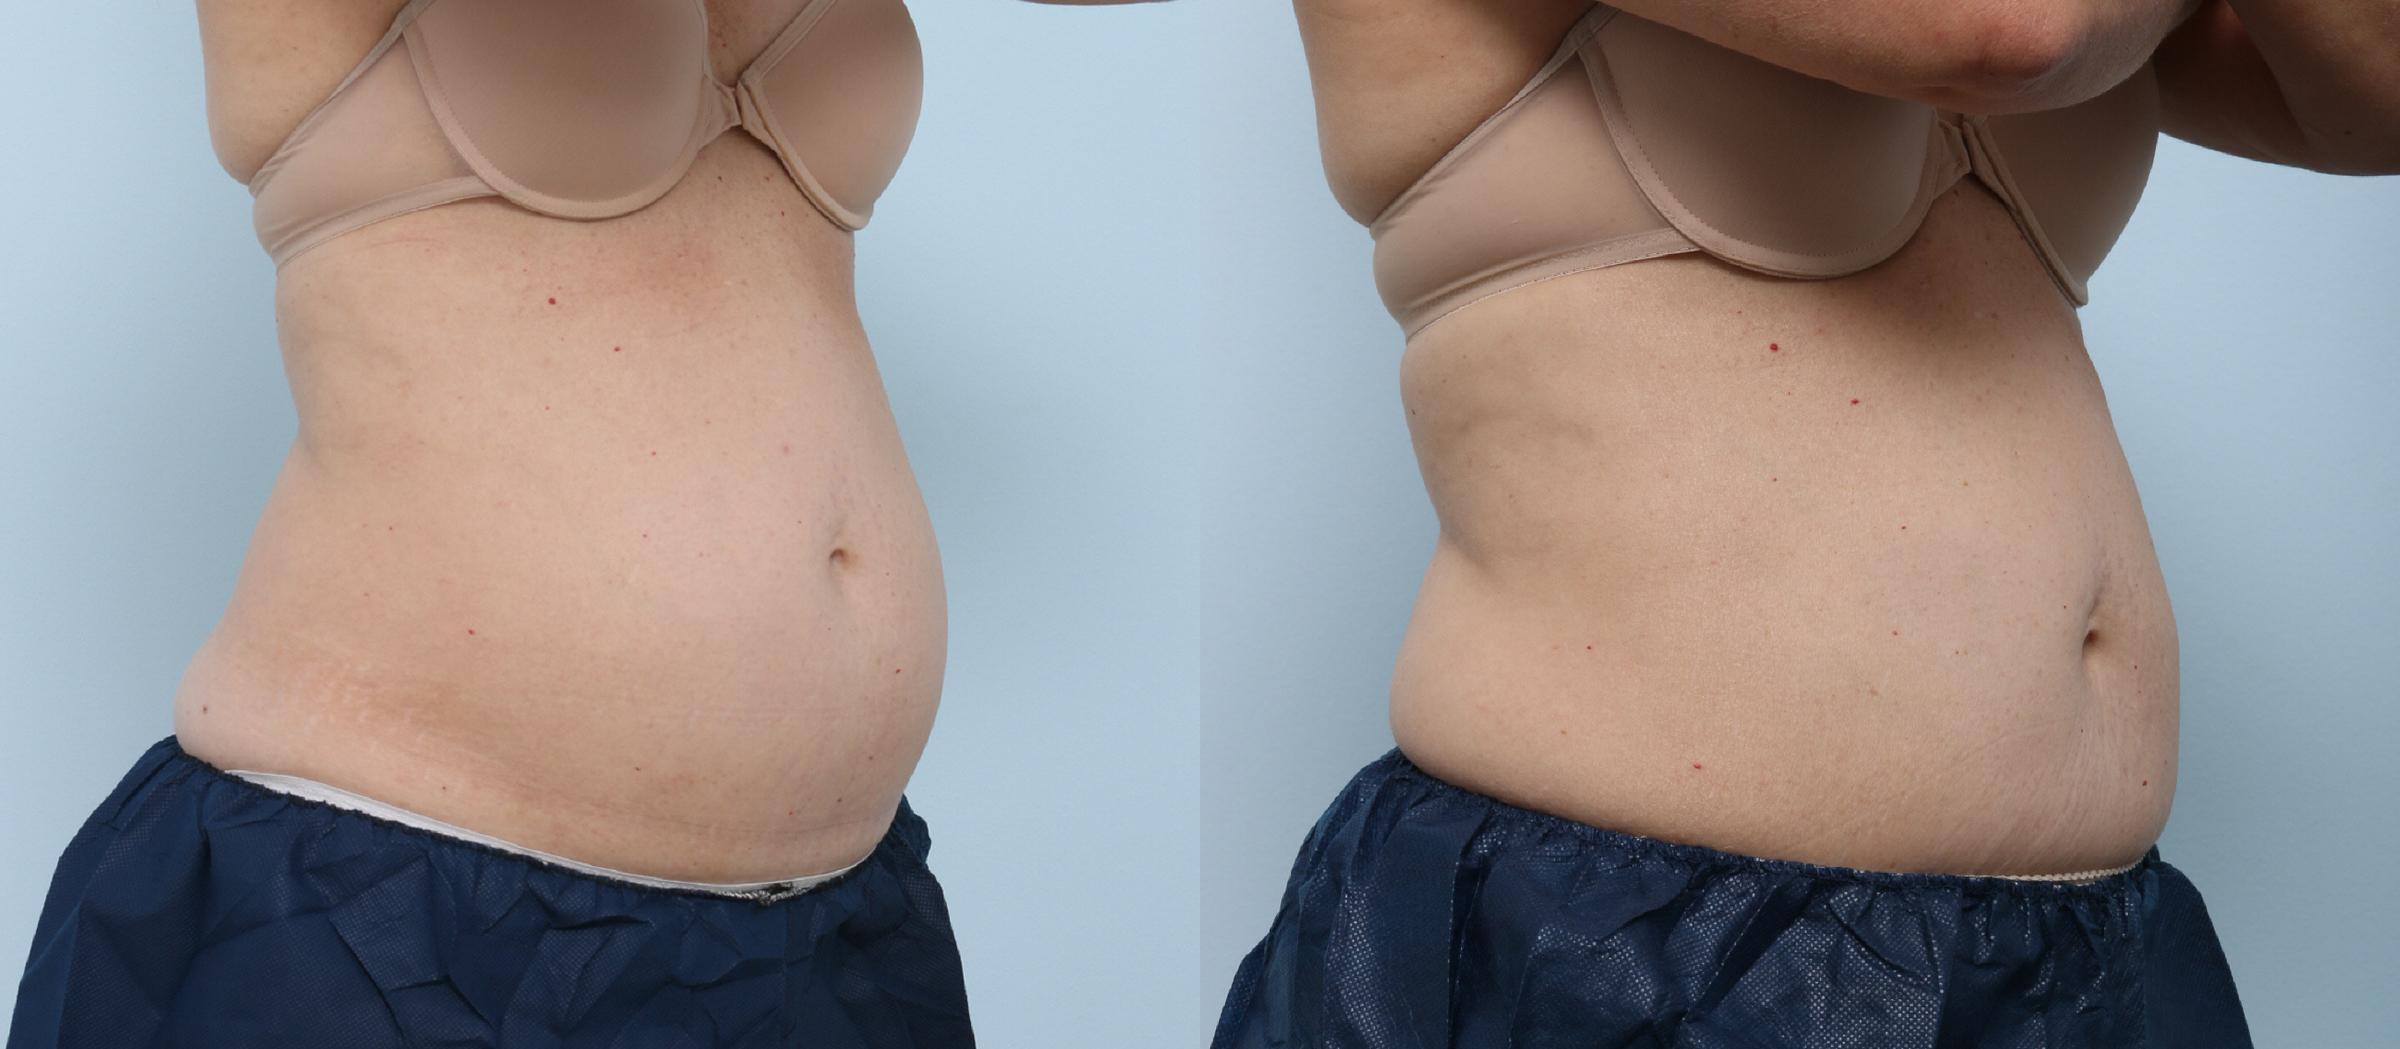  before and after pictures in , , Your CoolSculpting Questions Answered